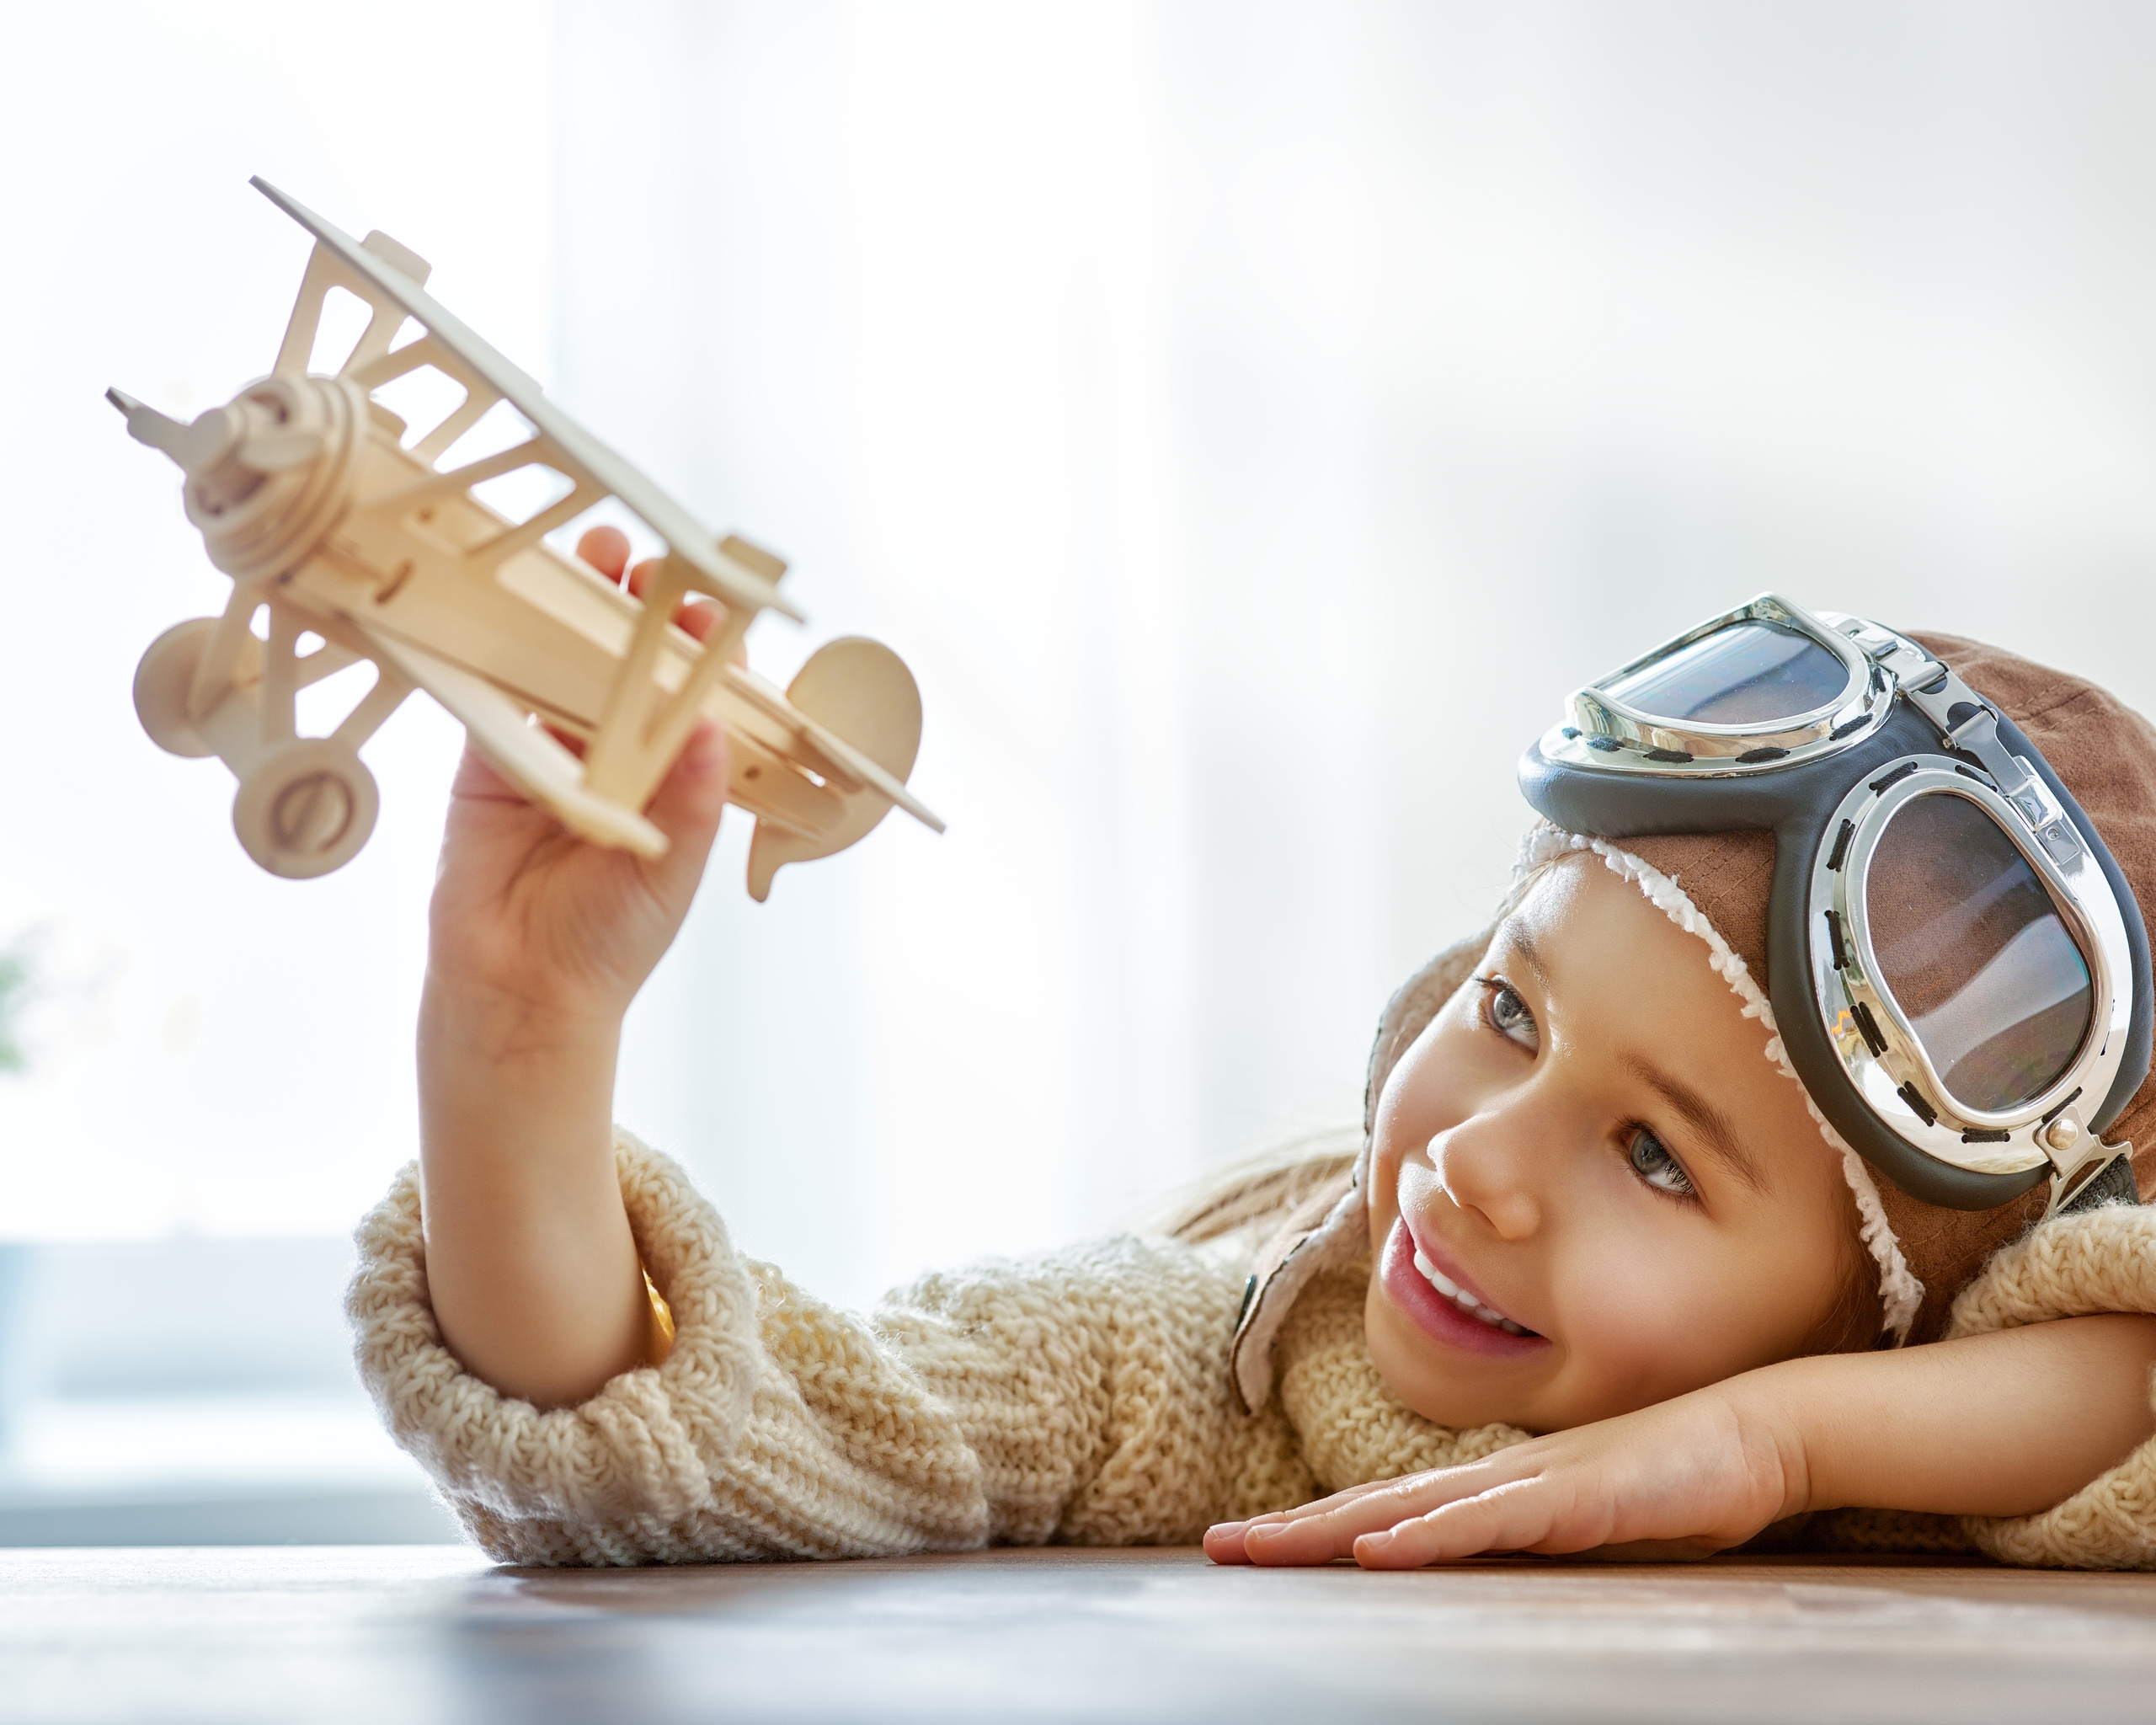 Image: Boy, the game, the mood, the pilot, the pilot toy plane, helmet, glasses